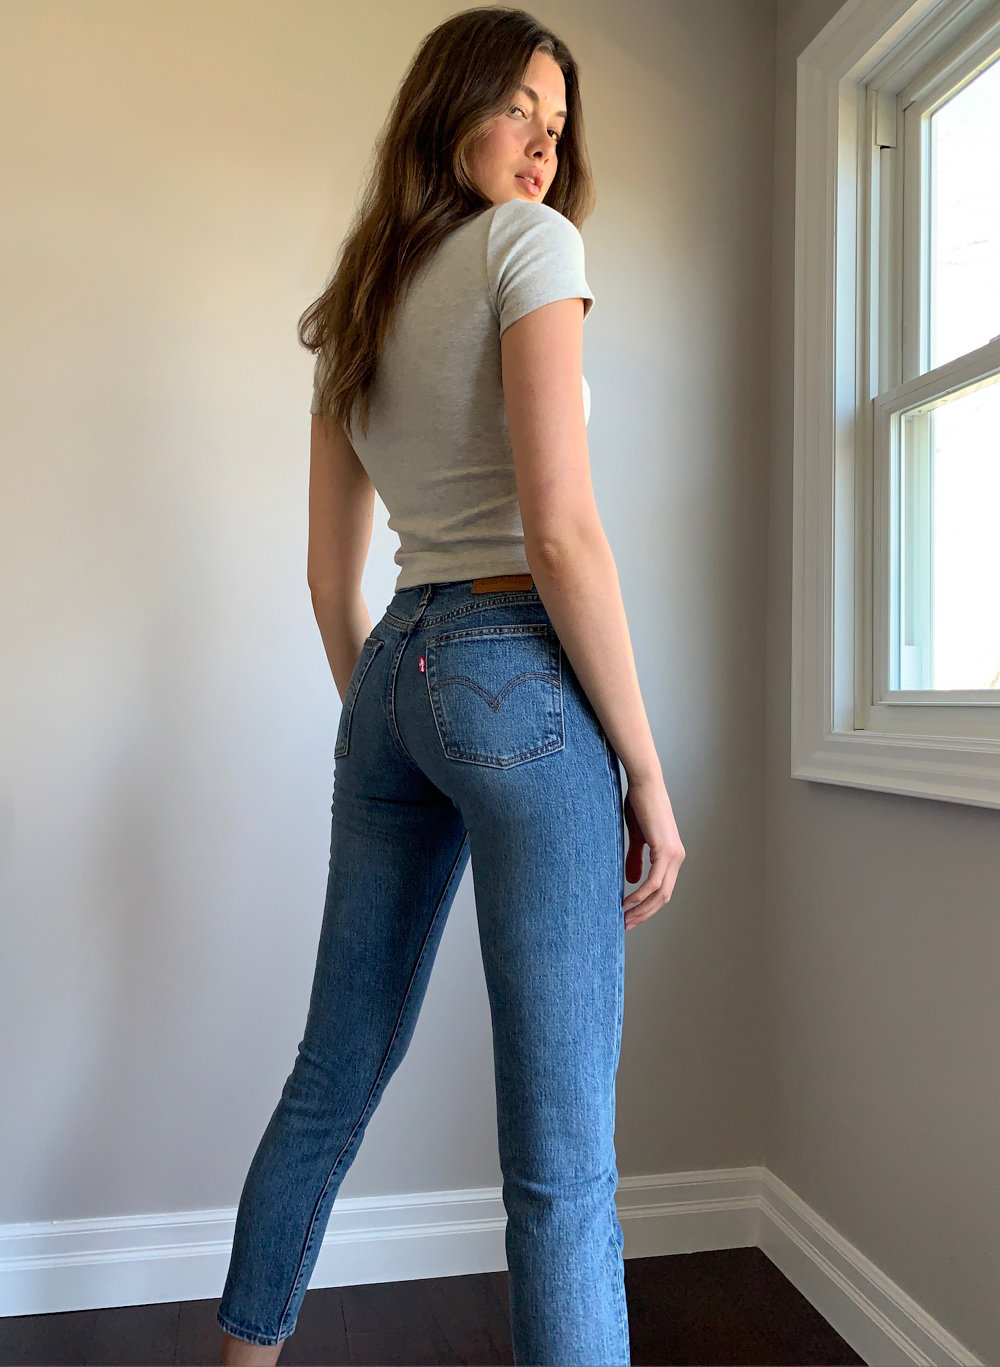 levis wedgie icon jeans